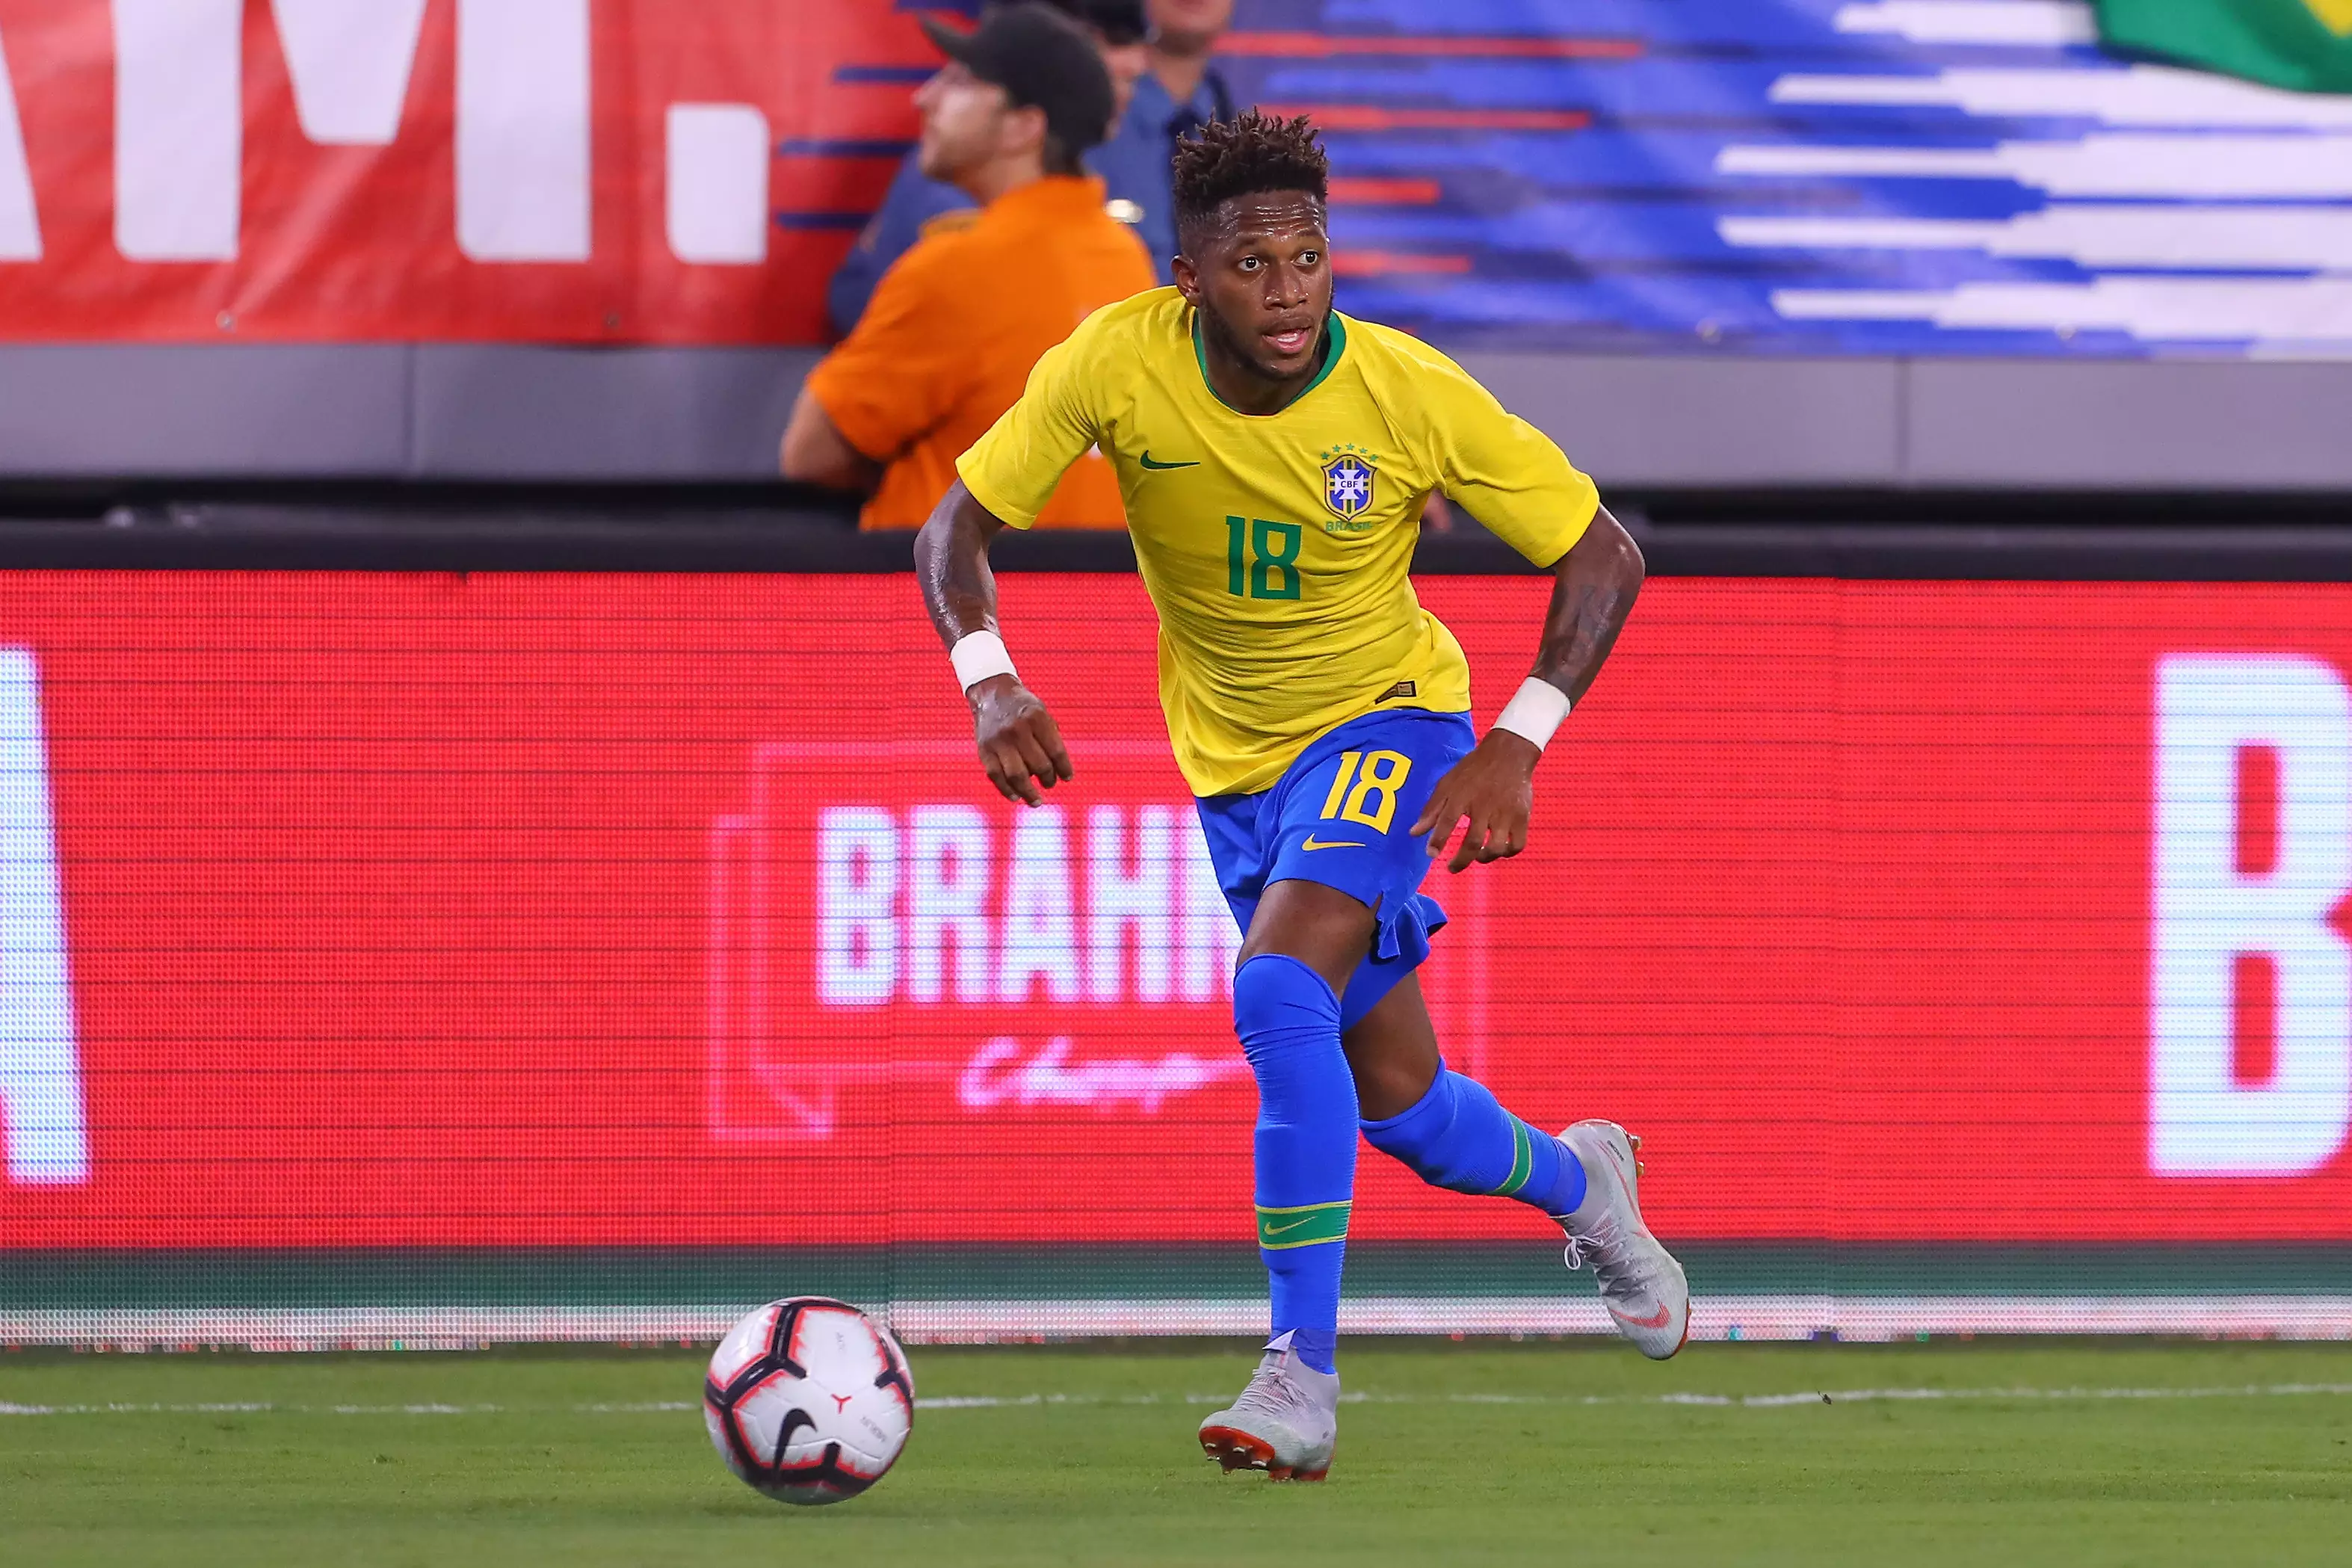 Fred was left out of Brazil's squad for Copa America in the summer